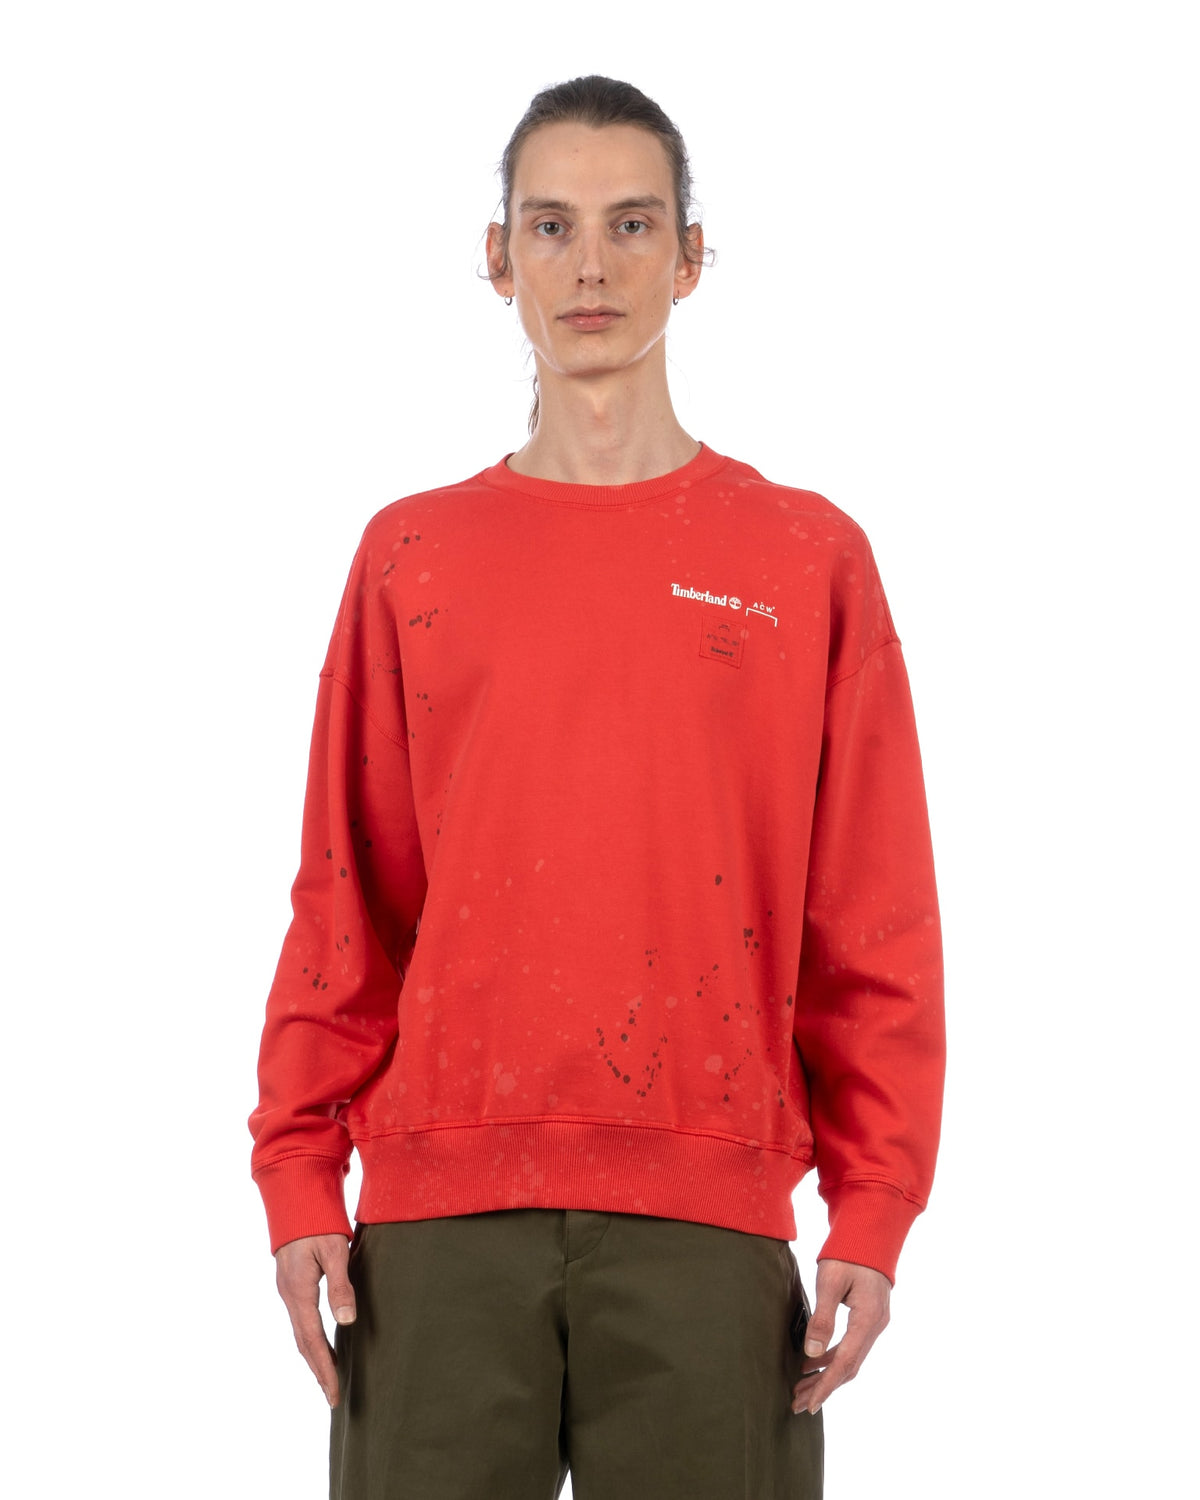 A-COLD-WALL* | x Timberland Crewneck Volt Red - Concrete